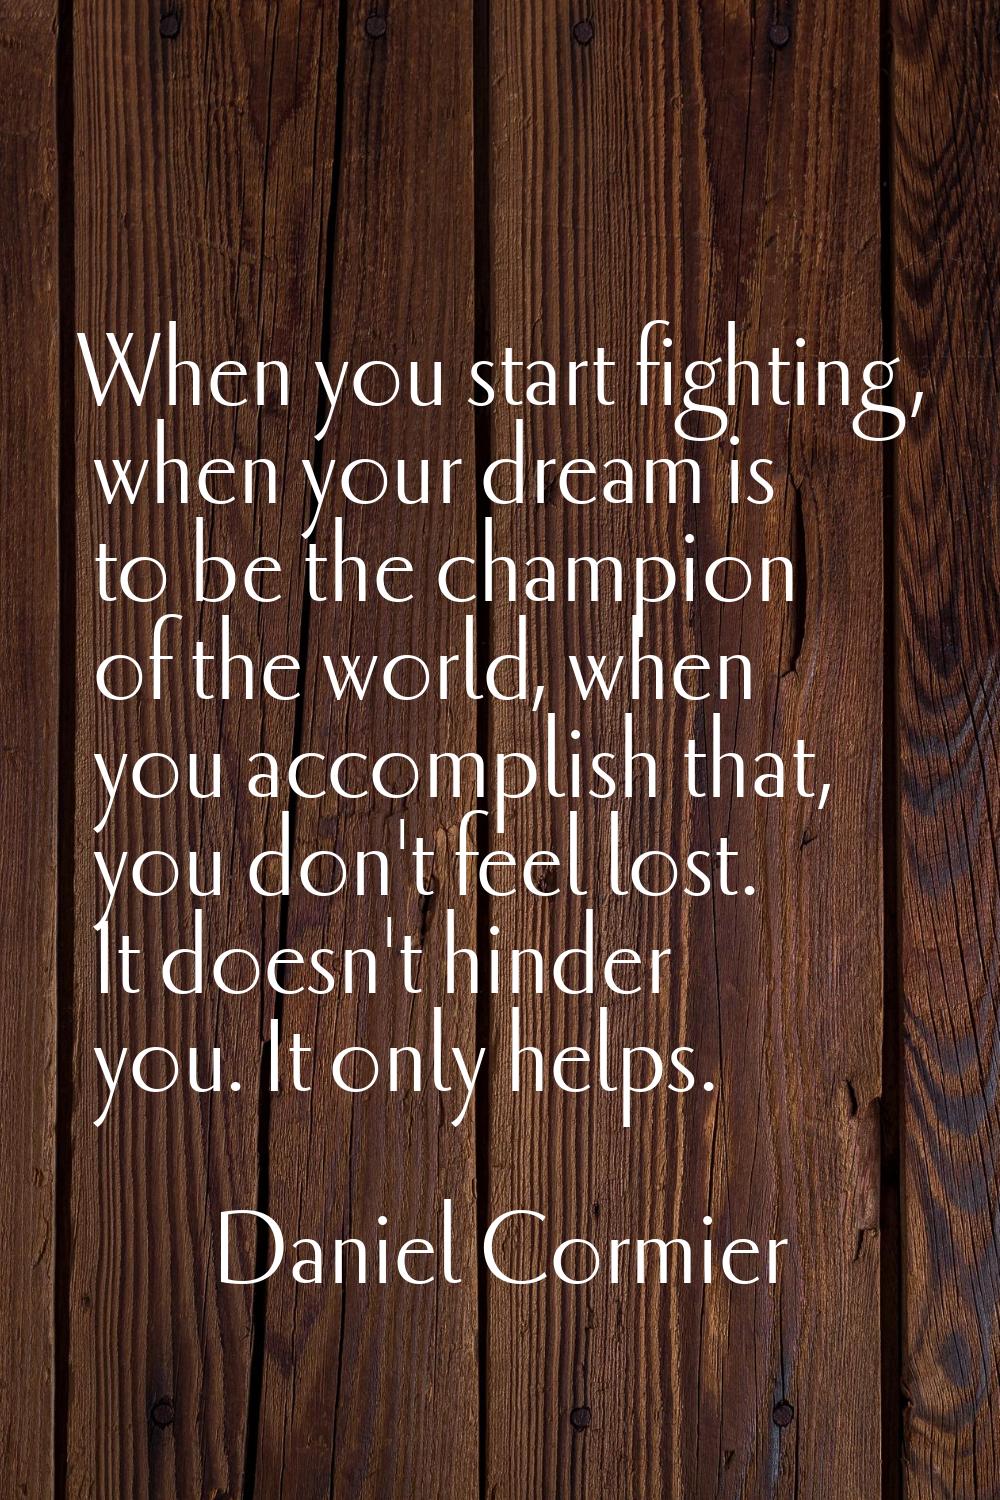 When you start fighting, when your dream is to be the champion of the world, when you accomplish th